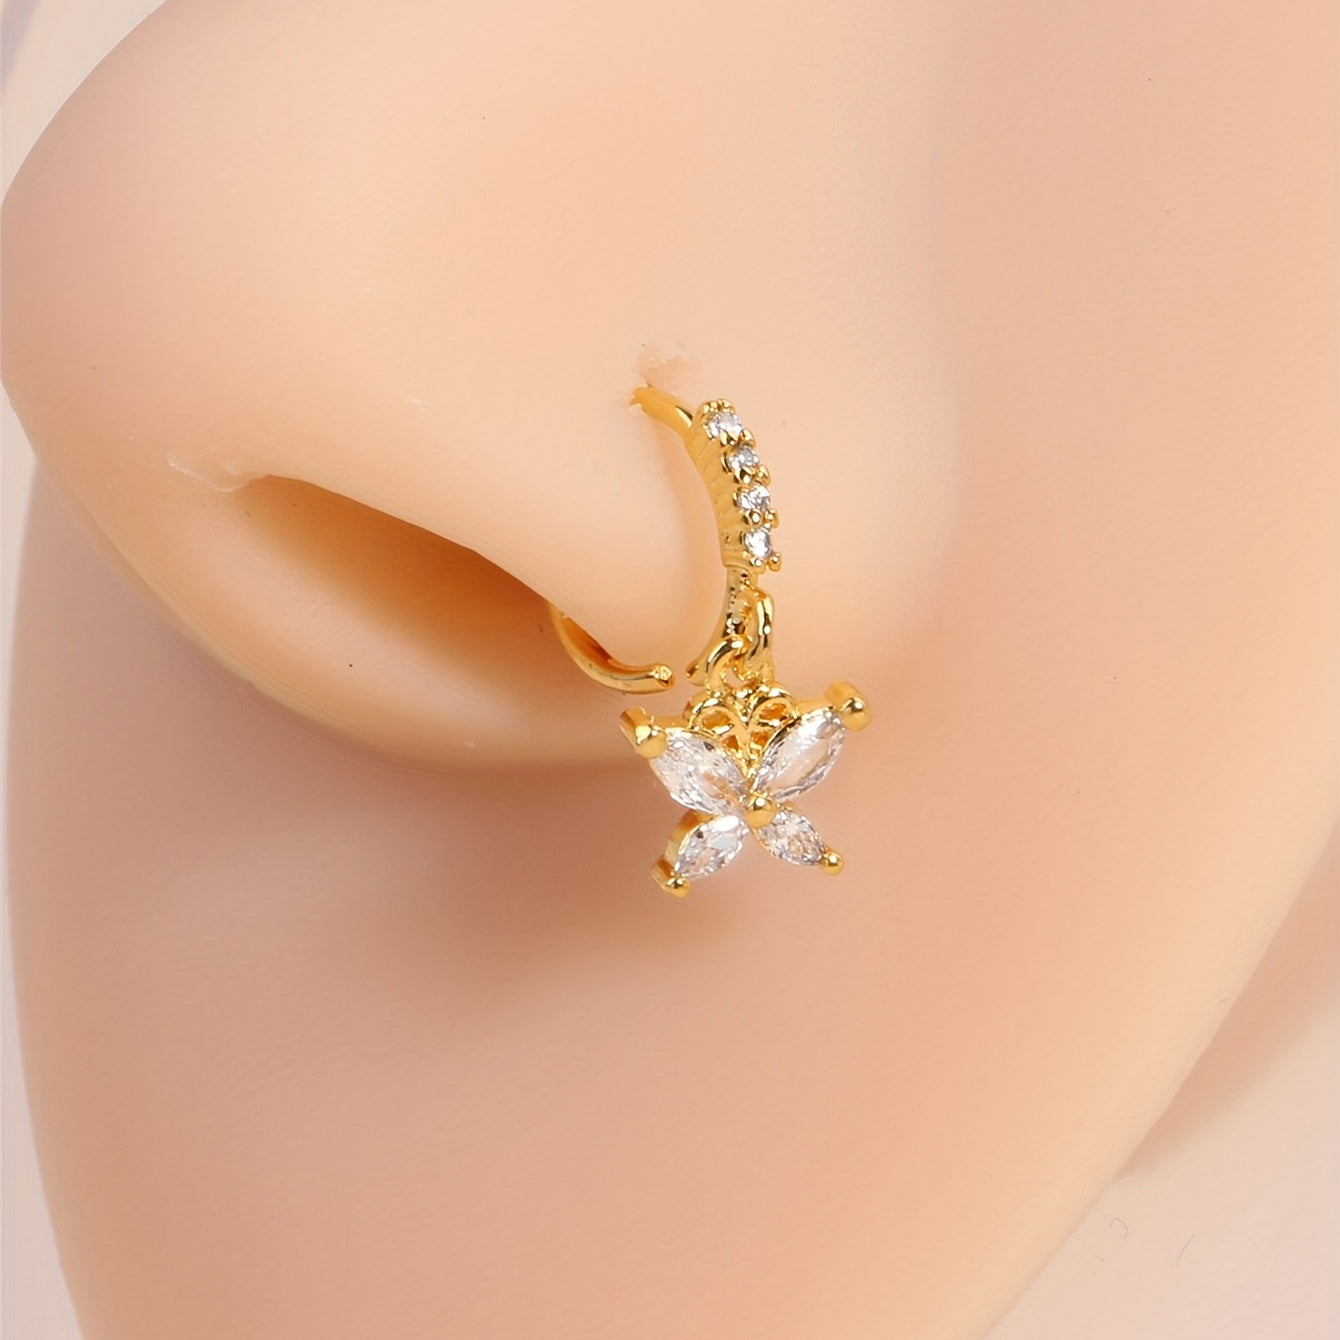 Unleash Your Inner Butterfly with our Dangle Nose Hoop Rings - Perfect for Body Piercing Jewelry!